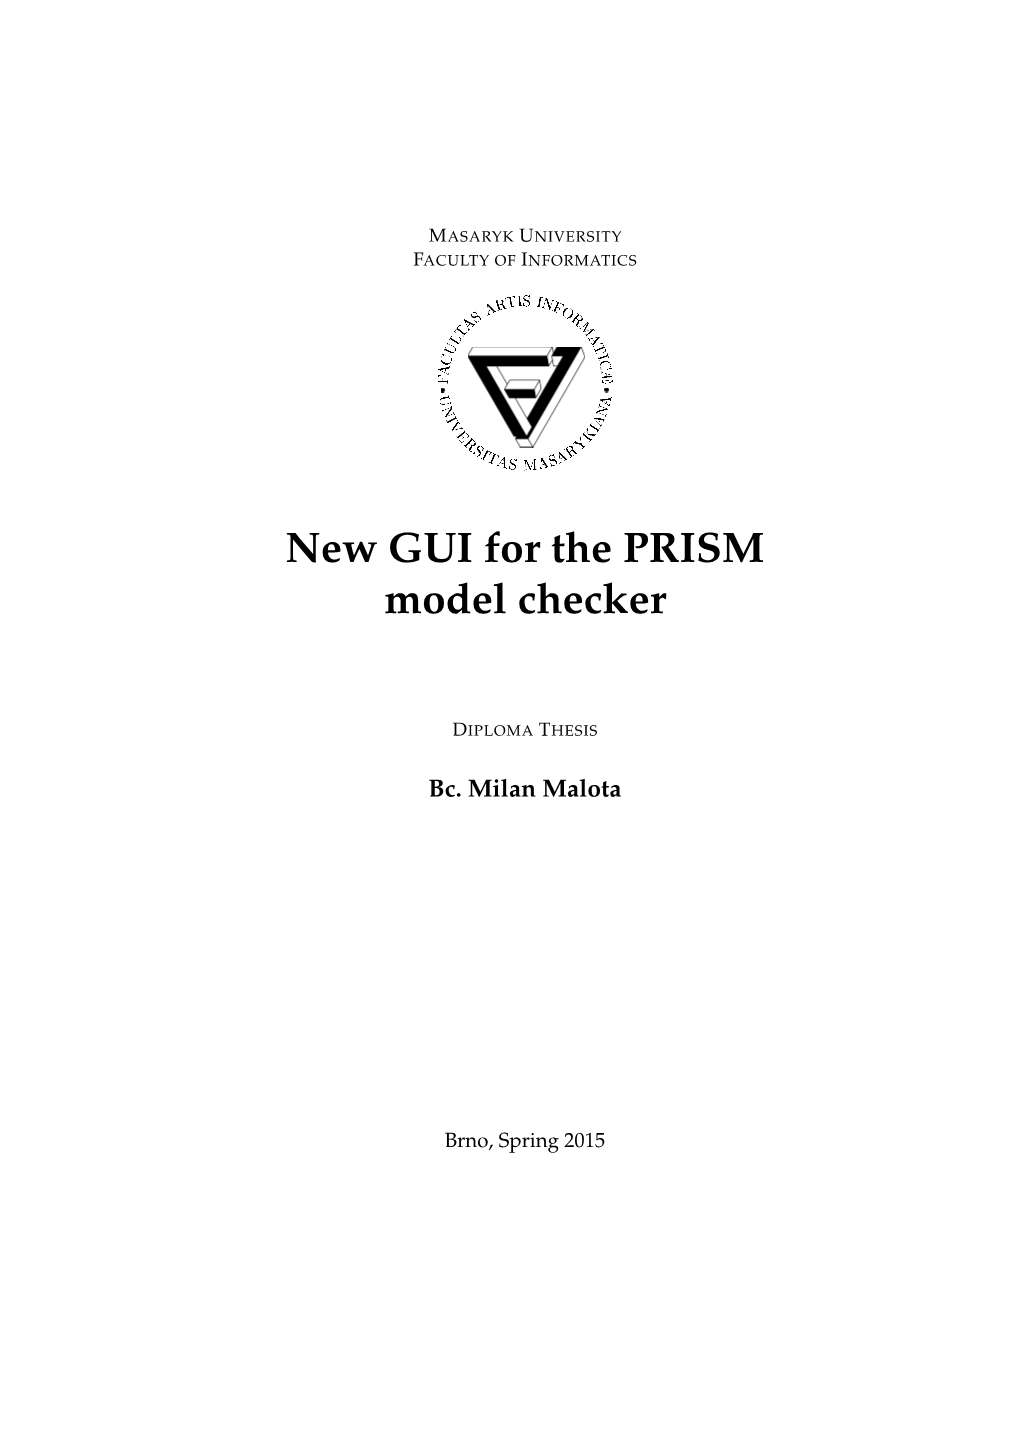 New GUI for the PRISM Model Checker